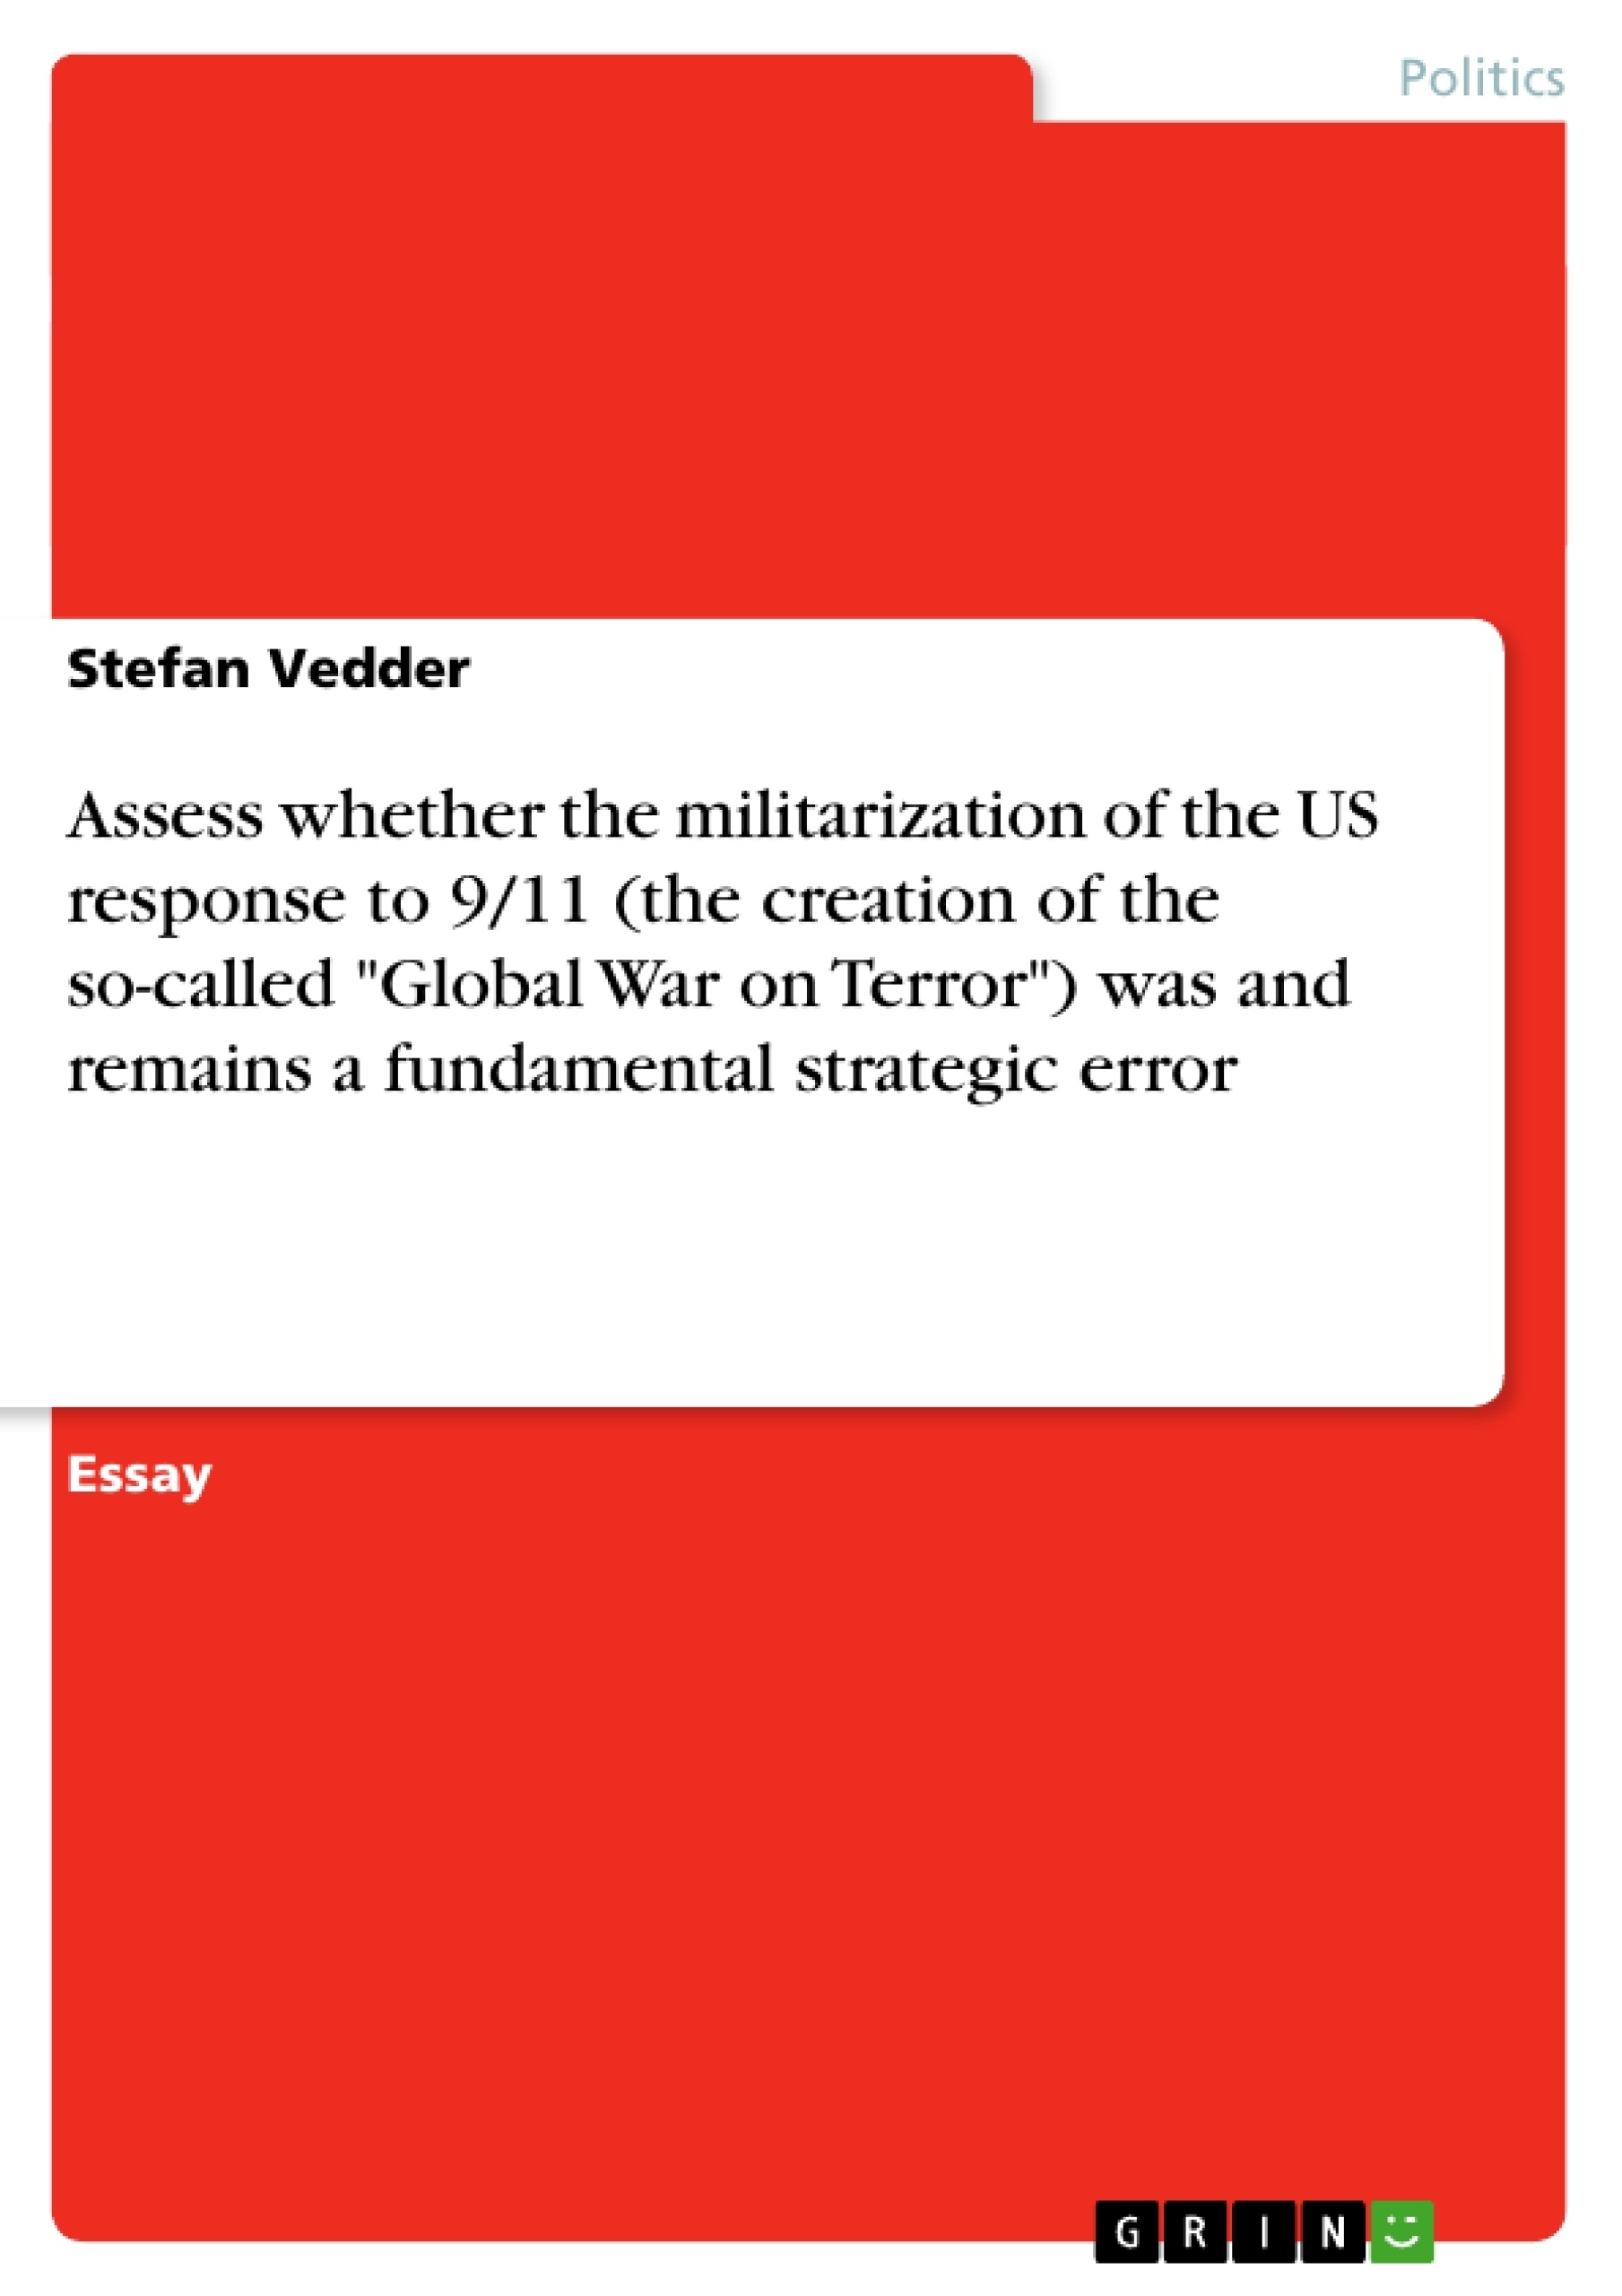 Title: Assess whether the militarization of the US response to 9/11 (the creation of the so-called "Global War on Terror") was and remains a fundamental strategic error